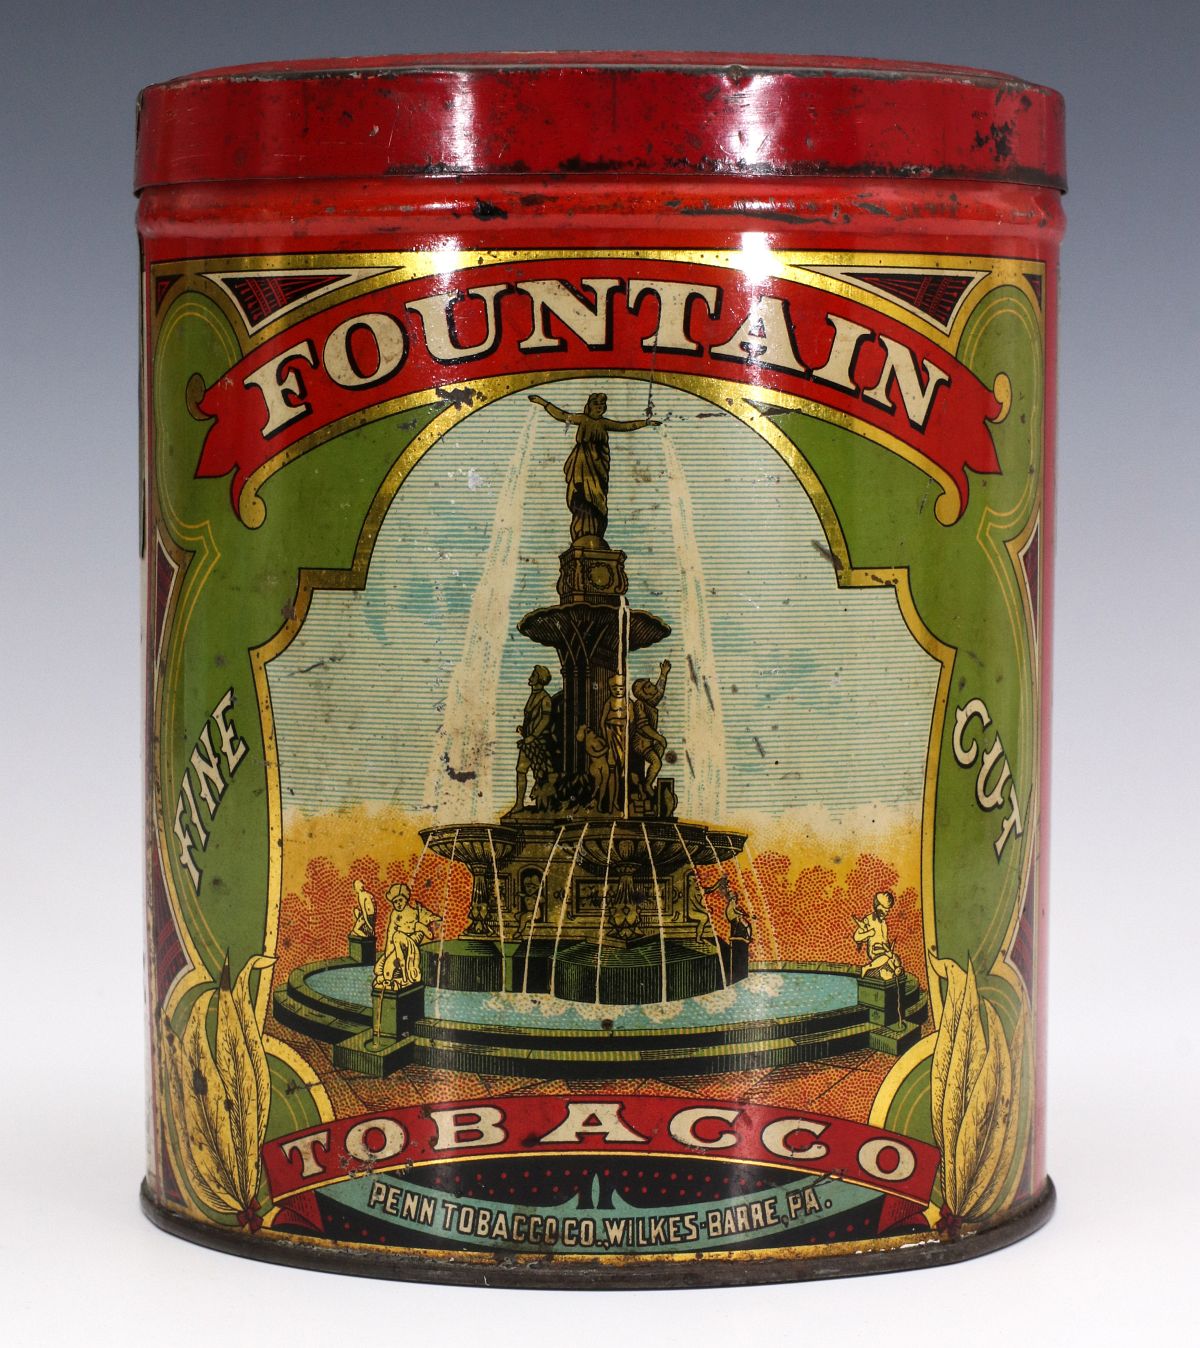 A RARE AND COLORFUL 'FOUNTAIN' BRAND TOBACCO CAN